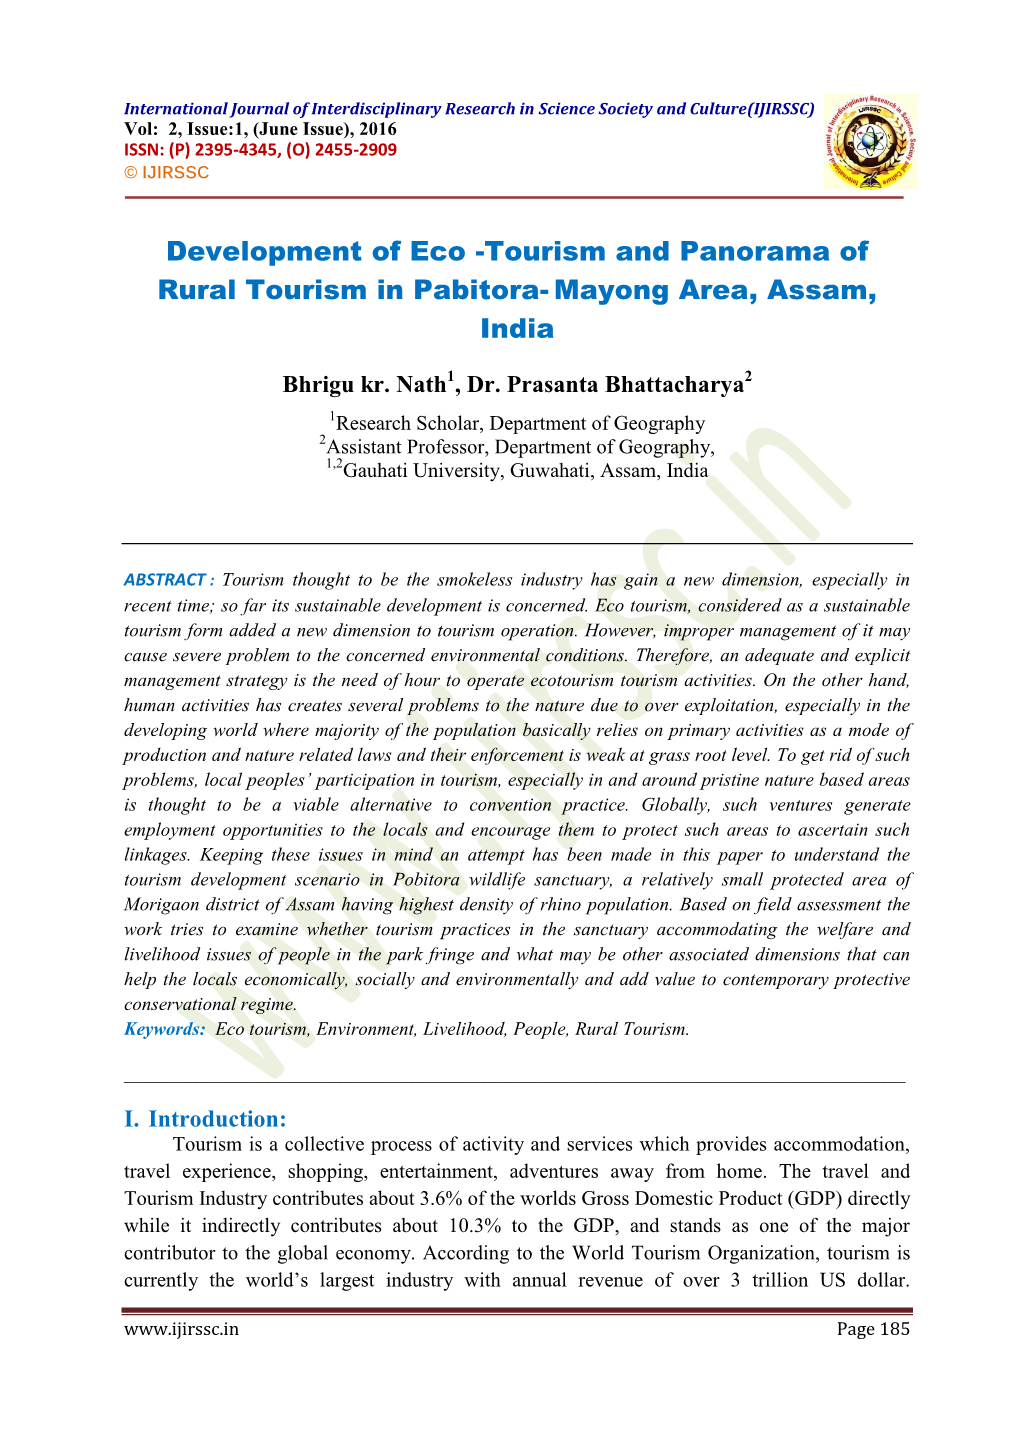 Development of Eco -Tourism and Panorama of Rural Tourism in Pabitora- Mayong Area, Assam, India